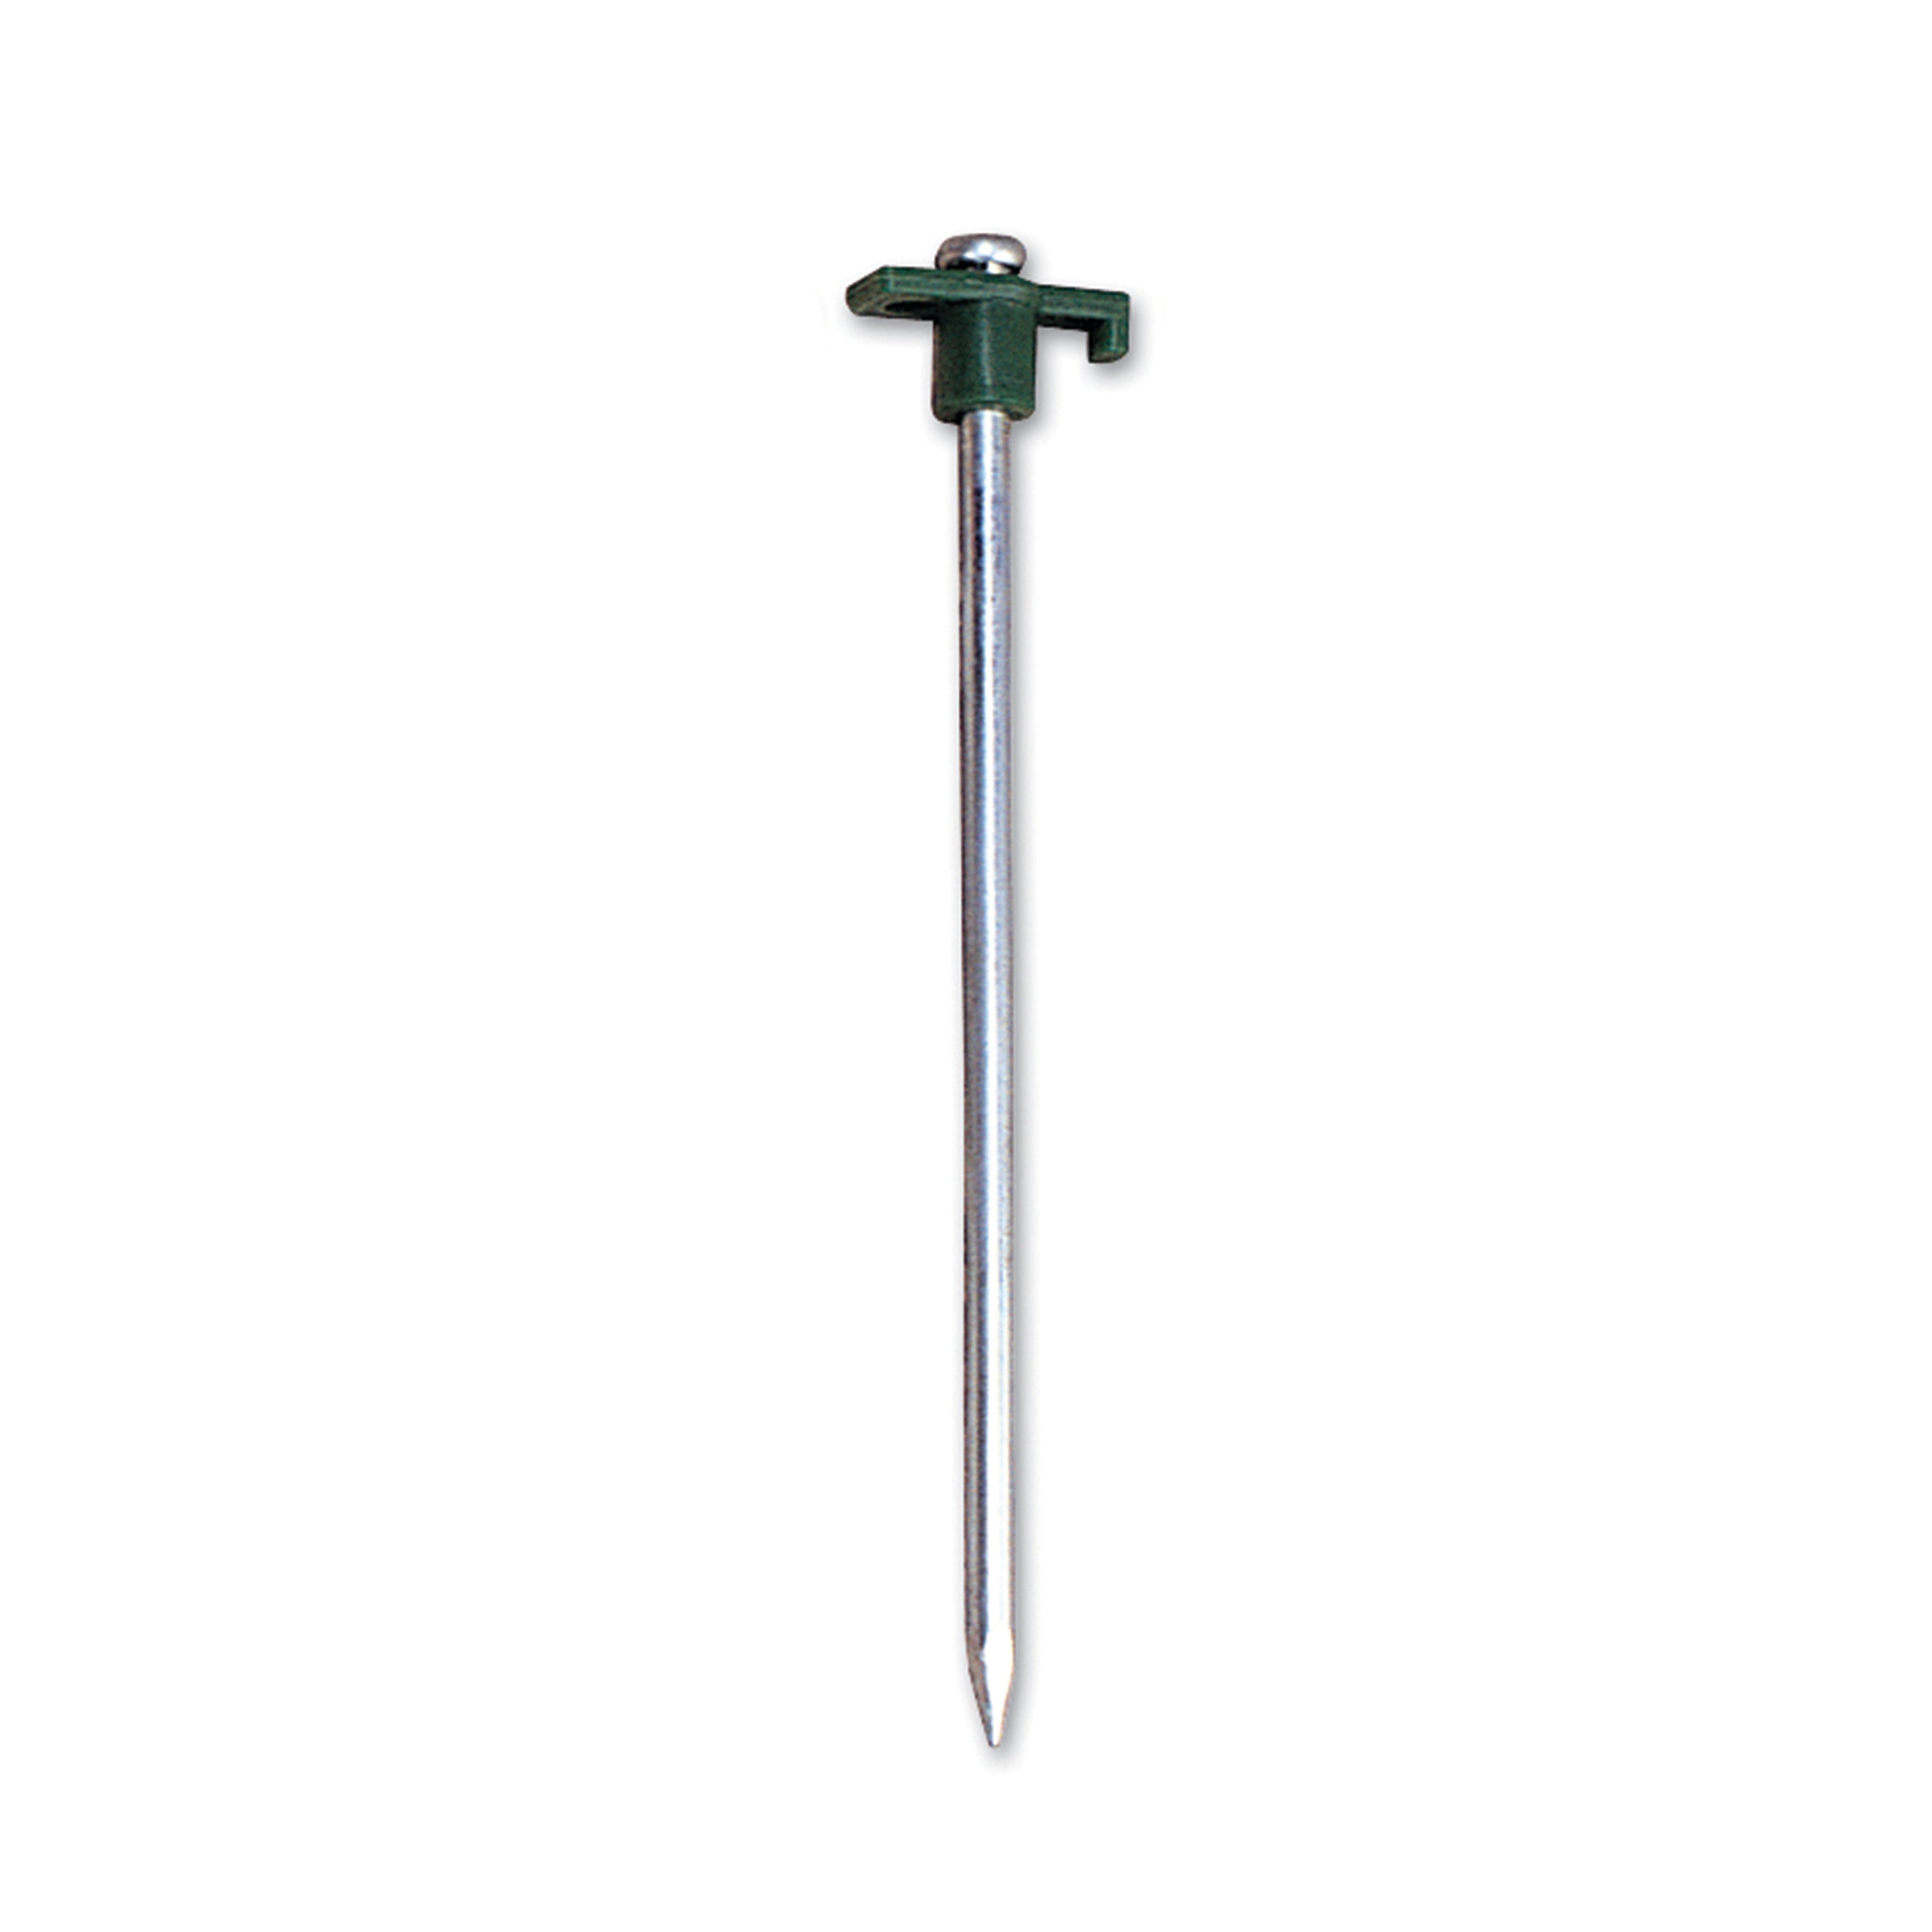 Nail Stake With T-Top - 50 Pack